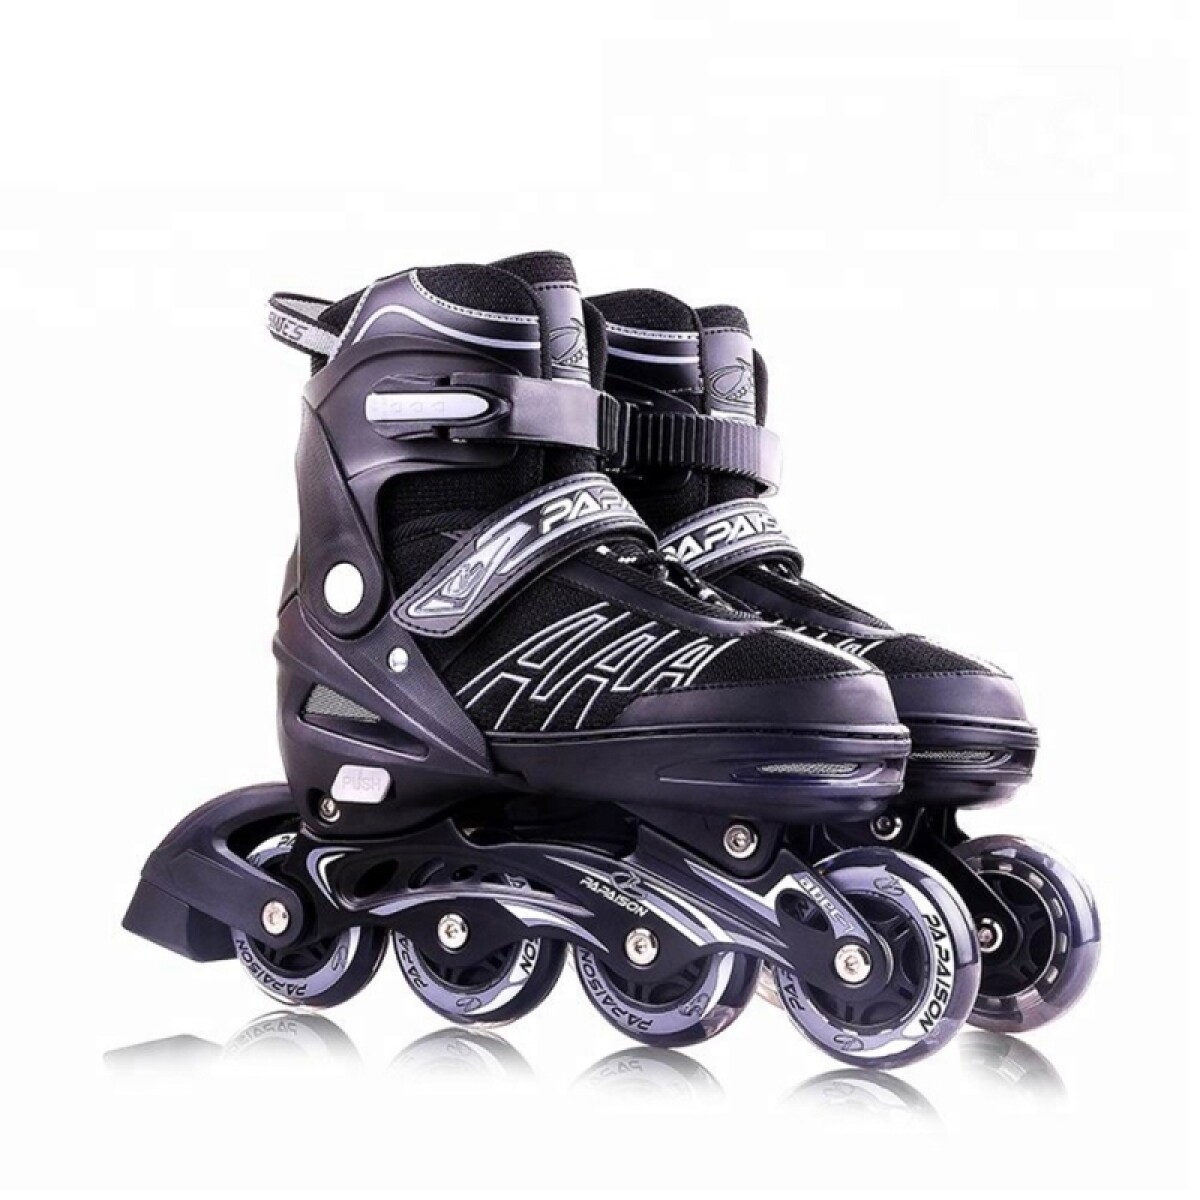 Roller Patines 4 Ruedas Lineal Papaison Regulables Negros - Talle L (38 Al 41) 